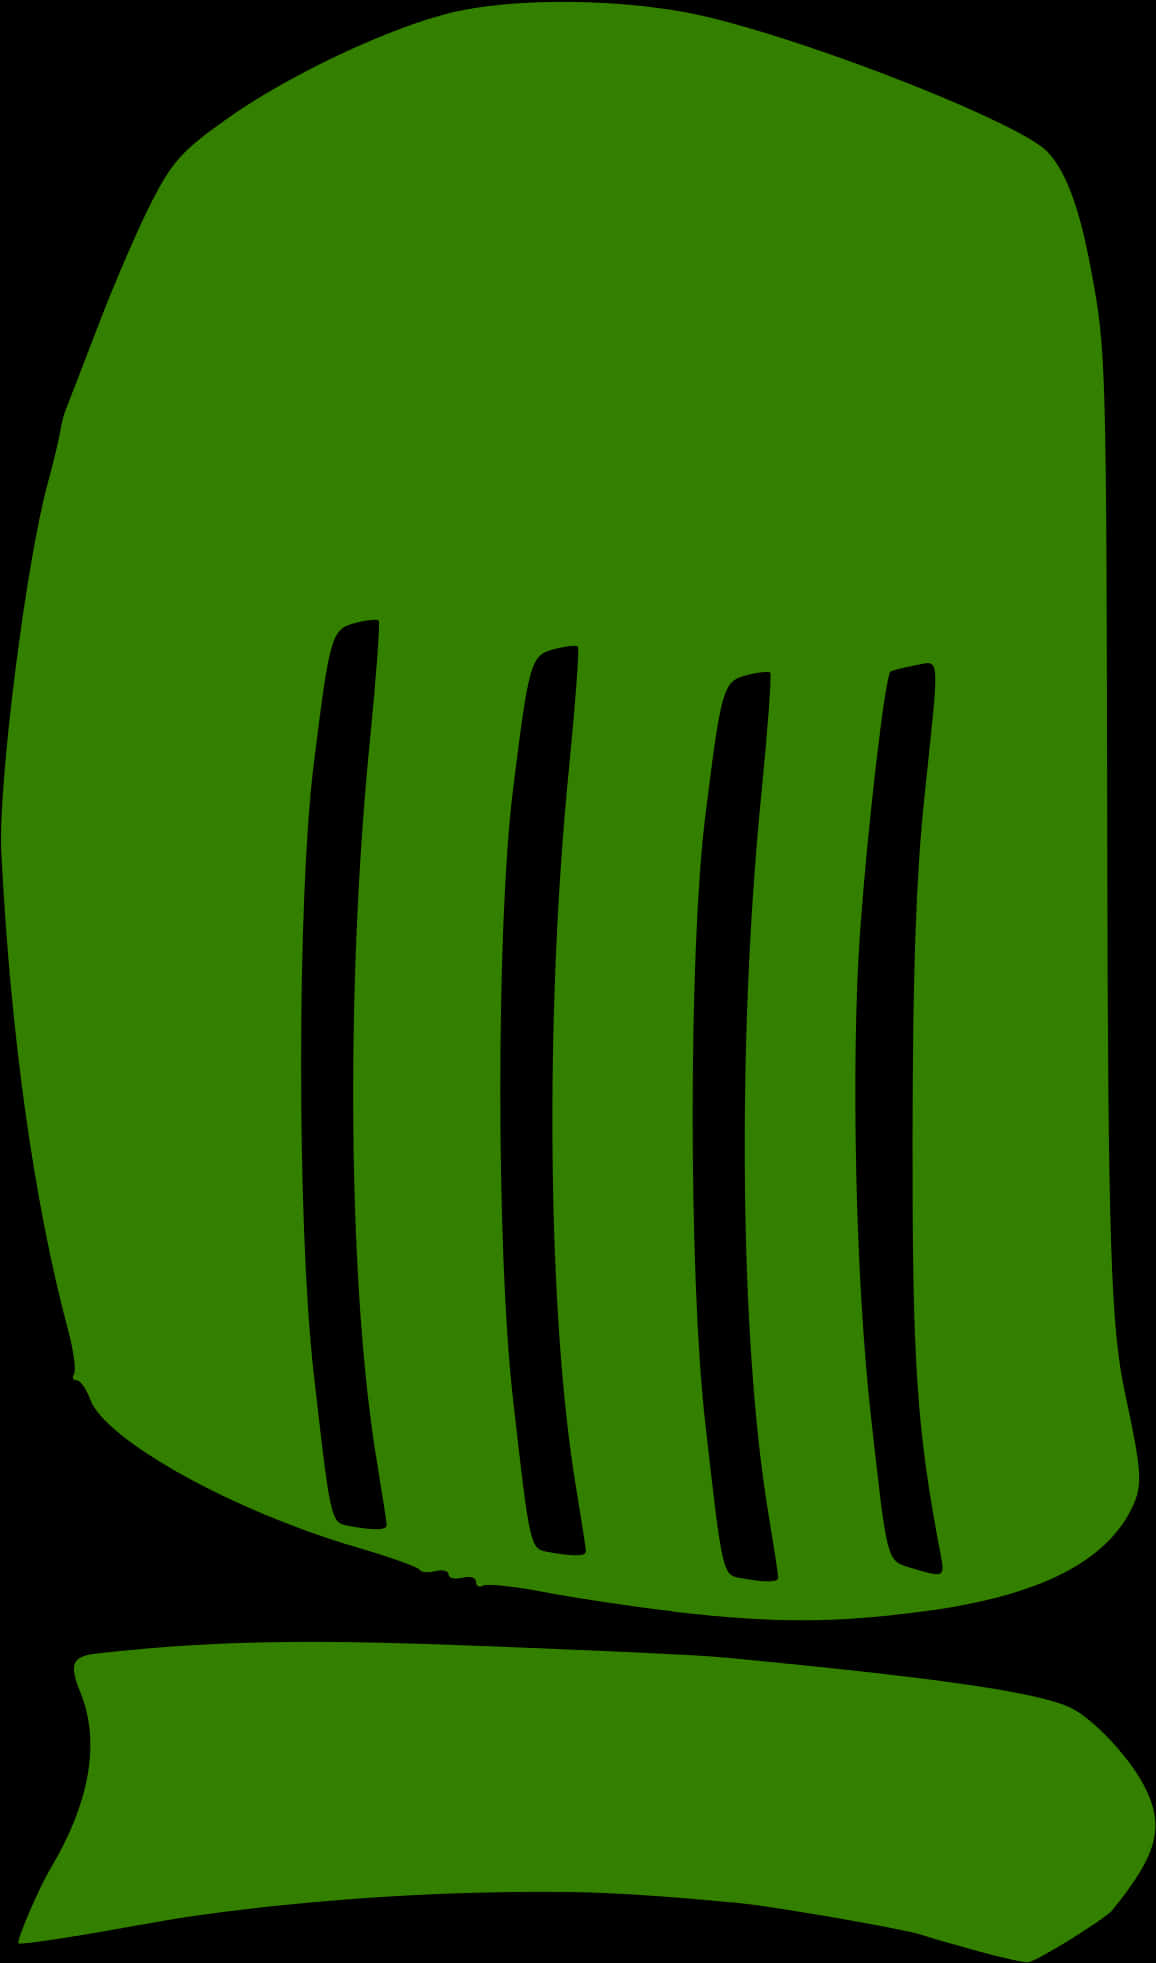 A Green Square With Black Lines